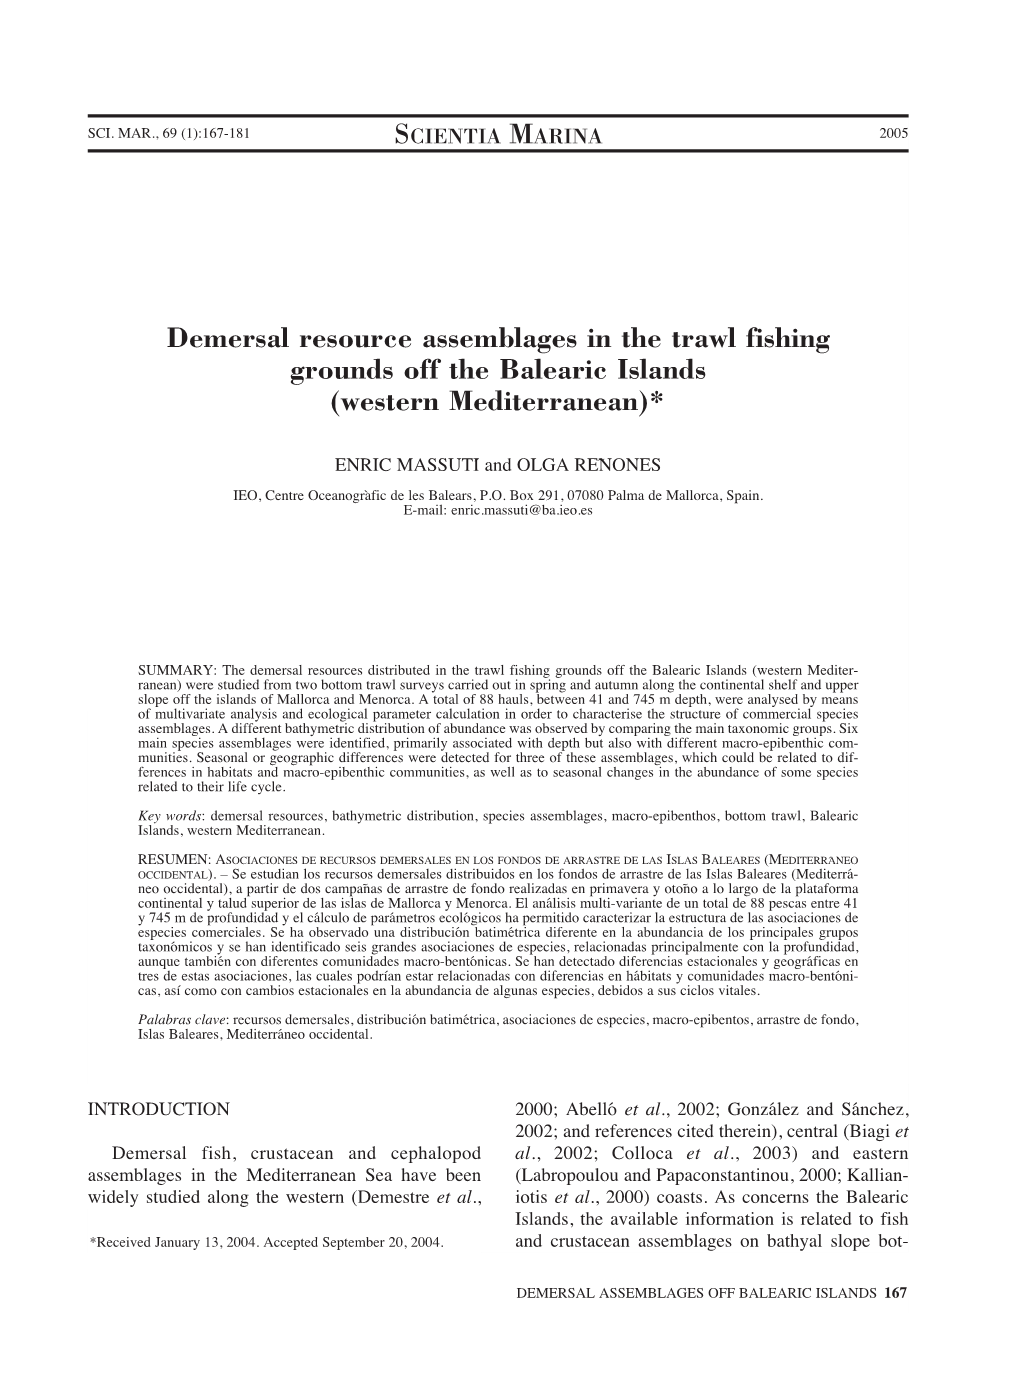 Demersal Resource Assemblages in the Trawl Fishing Grounds Off the Balearic Islands (Western Mediterranean)*